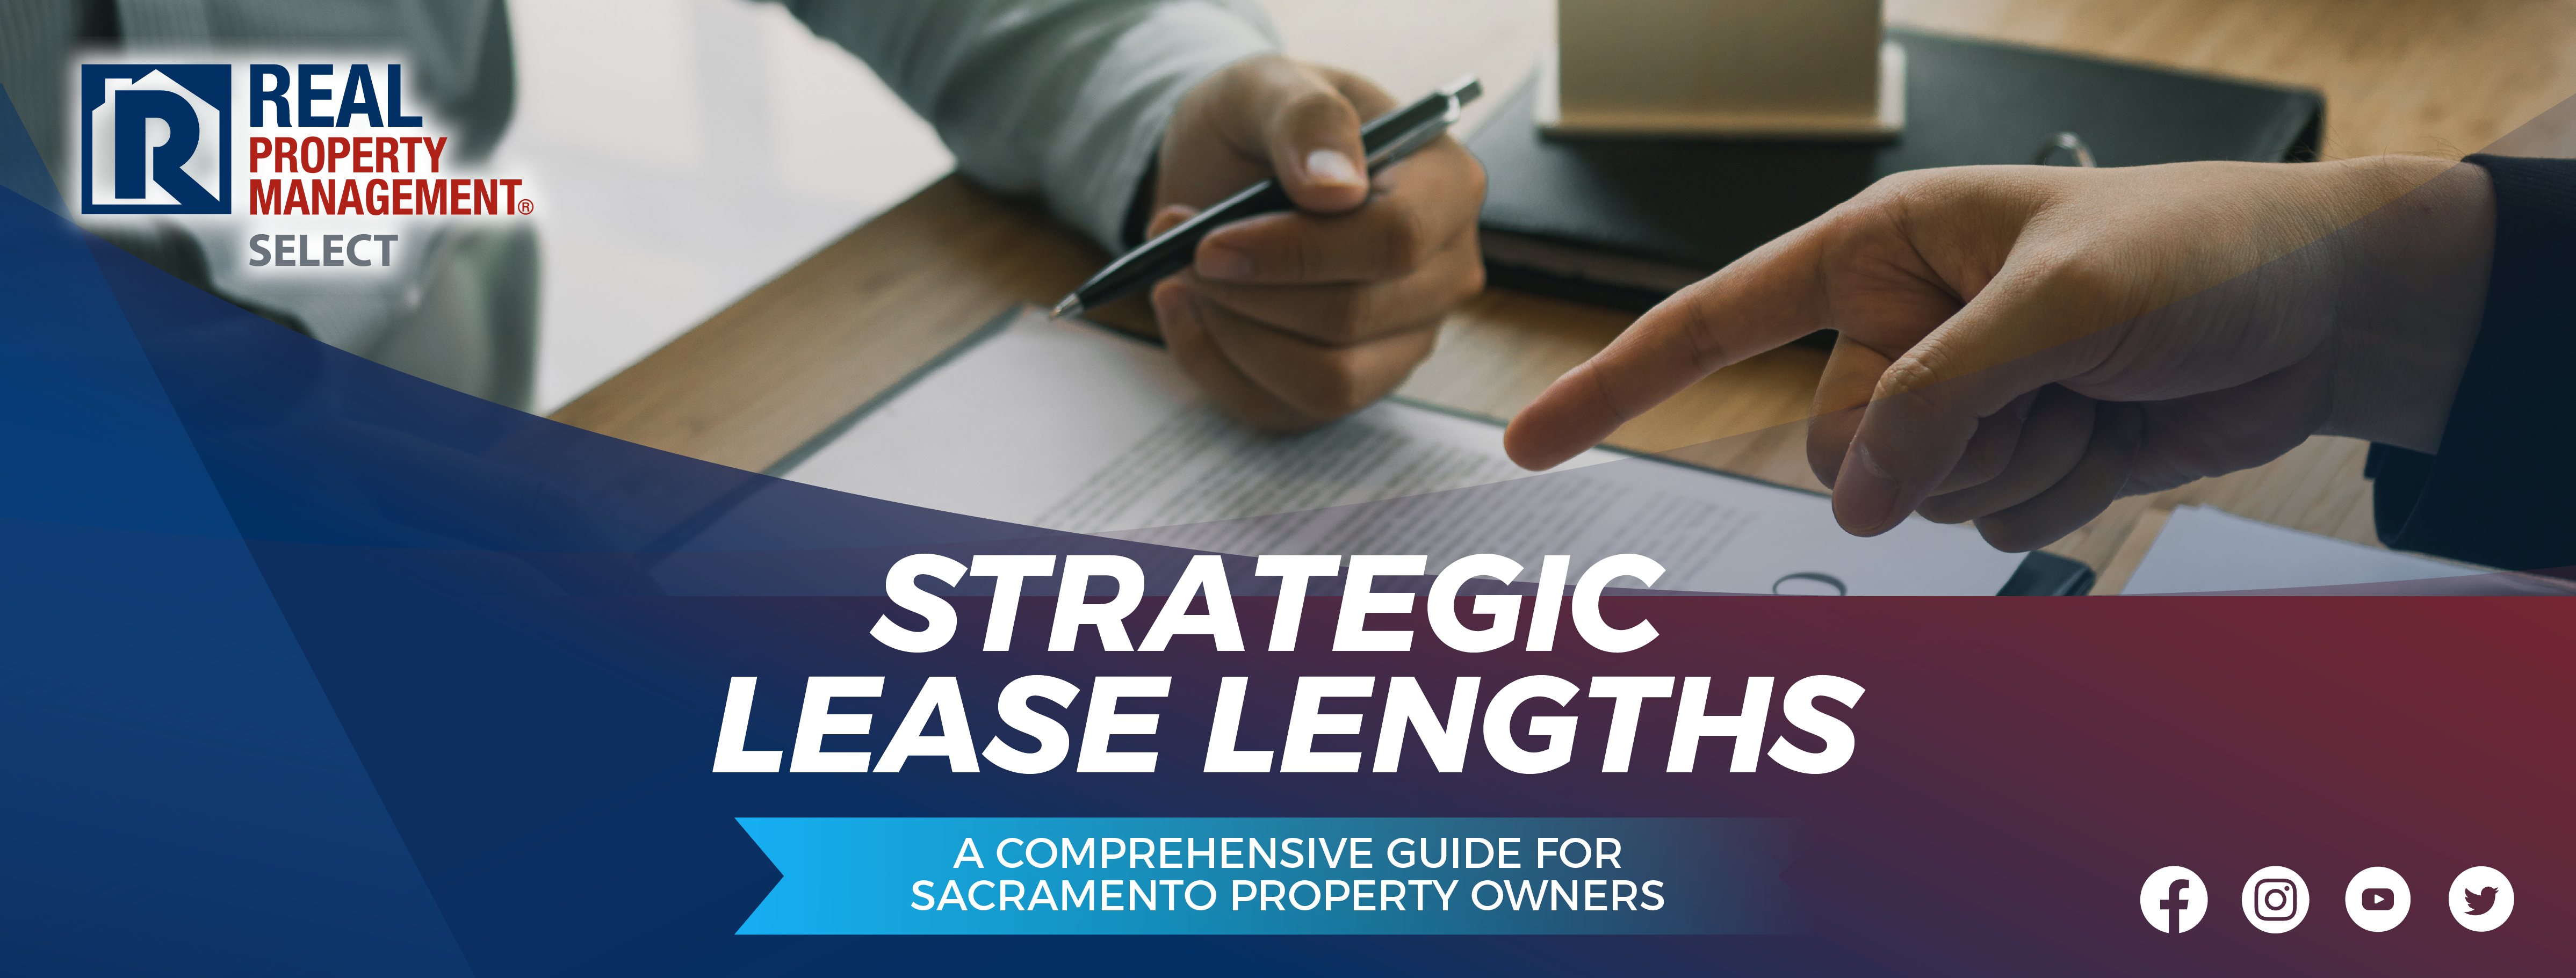 A Comprehensive Guide for Sacramento Property Owners